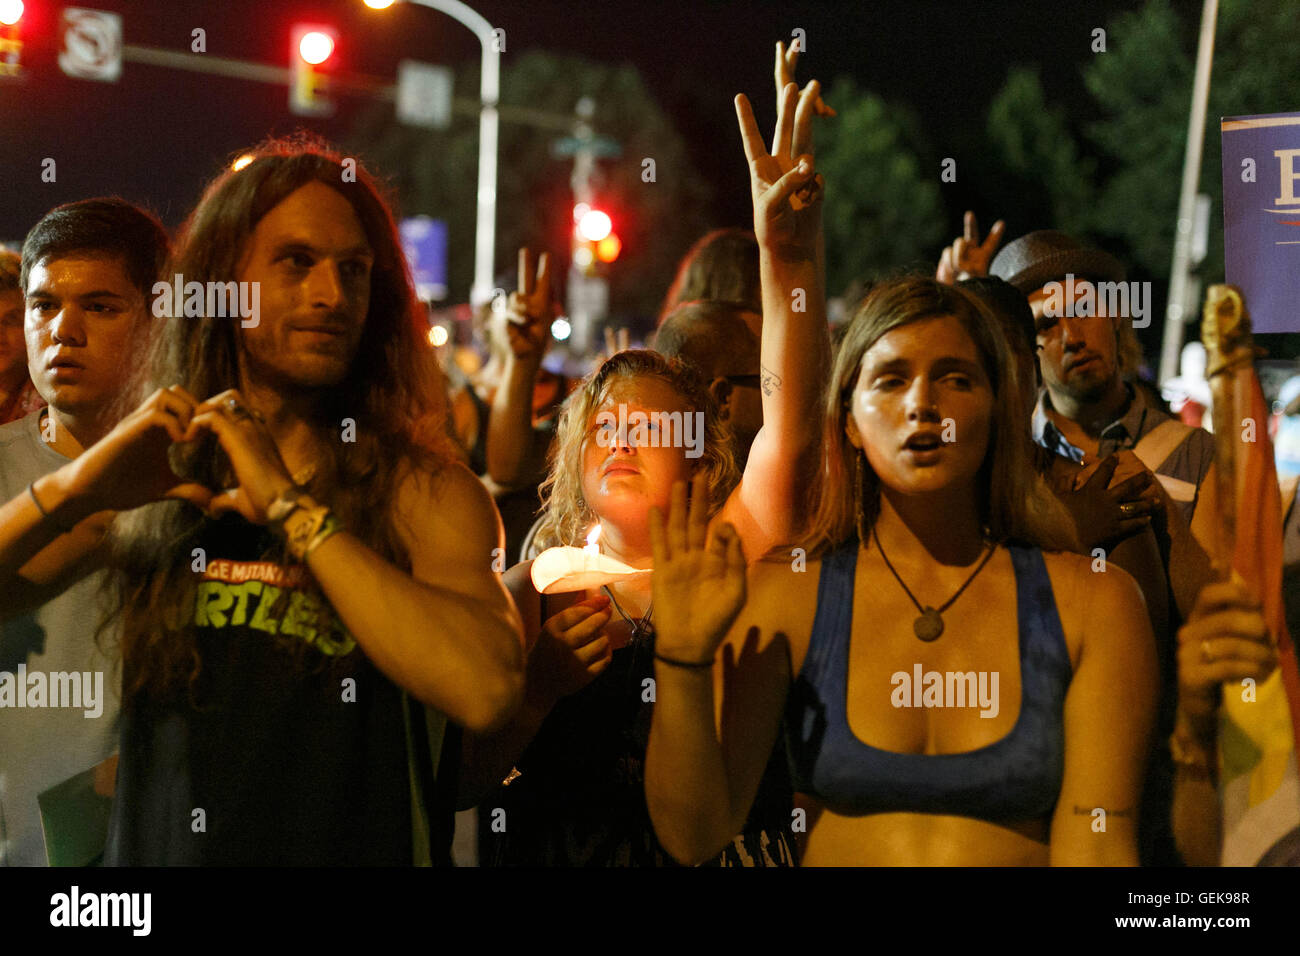 Philadelphia, Pennsylvania, USA. 26th July, 2016. Democratic National Convention. A group of Bernie Sanders supporters lights candles and chants outside of the DNC on July 26th, 2016. Credit:  John Orvis/Alamy Live News Stock Photo